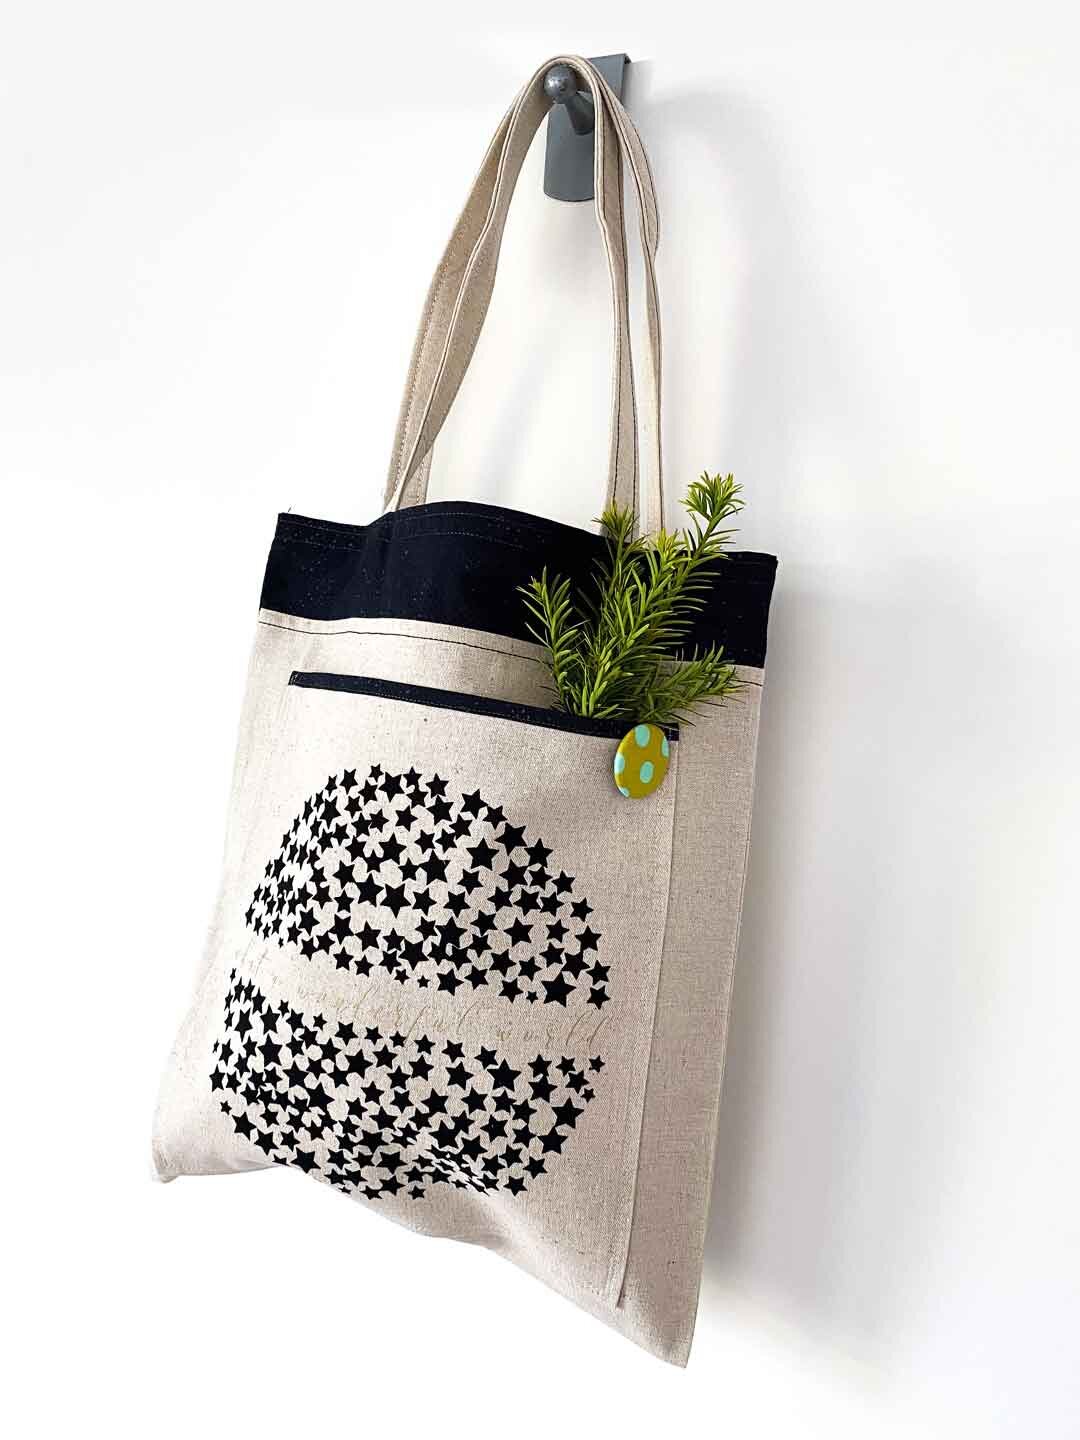 tote-bag-with-winter-panel-5.jpg